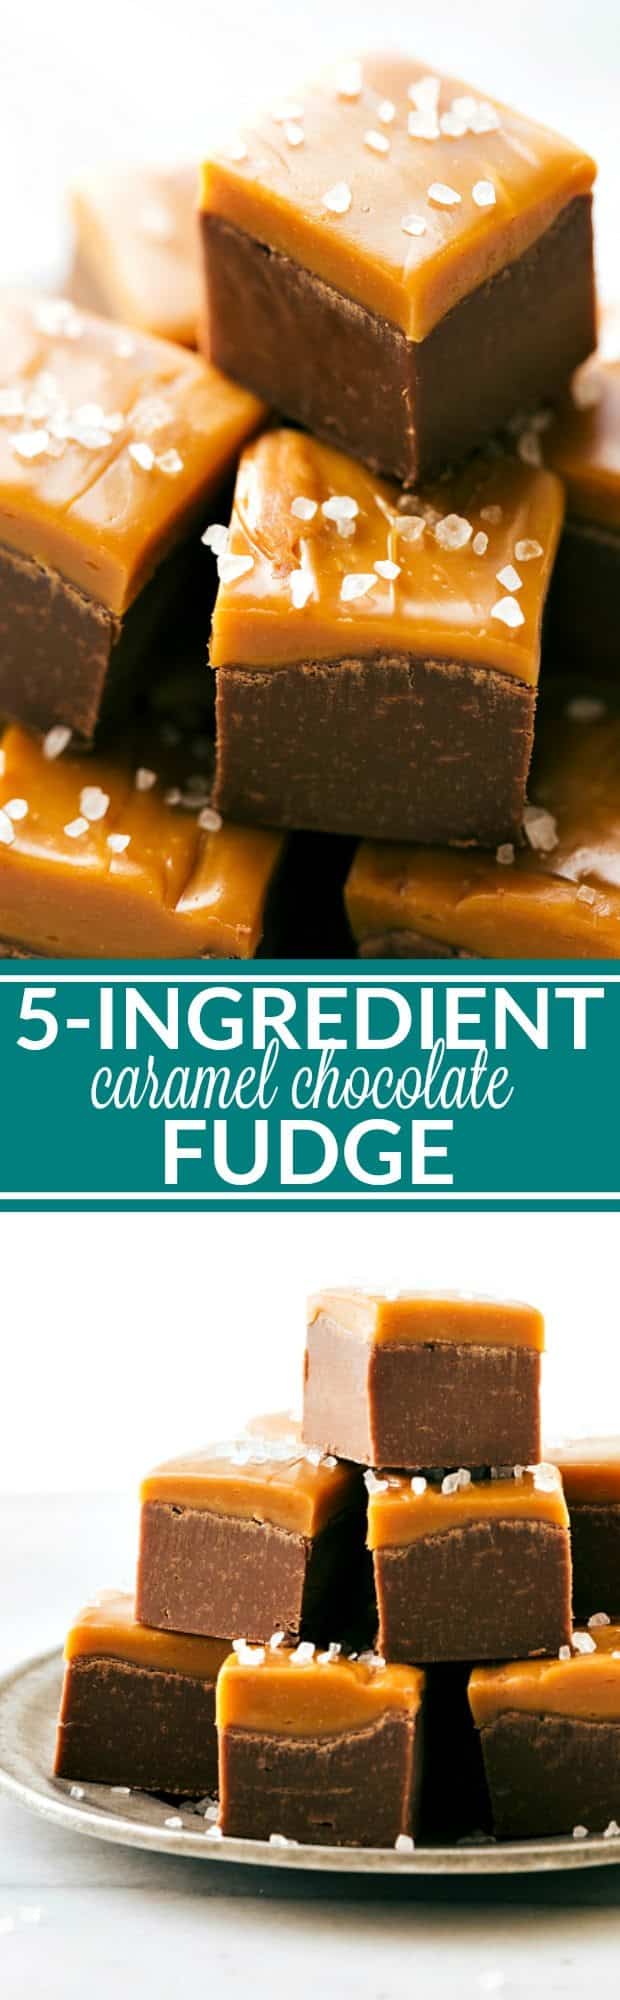 This simple caramel topped chocolate fudge is made easy with one bowl, only 5-ingredients, and all in the microwave! Recipe via chelseasmessyapron.com